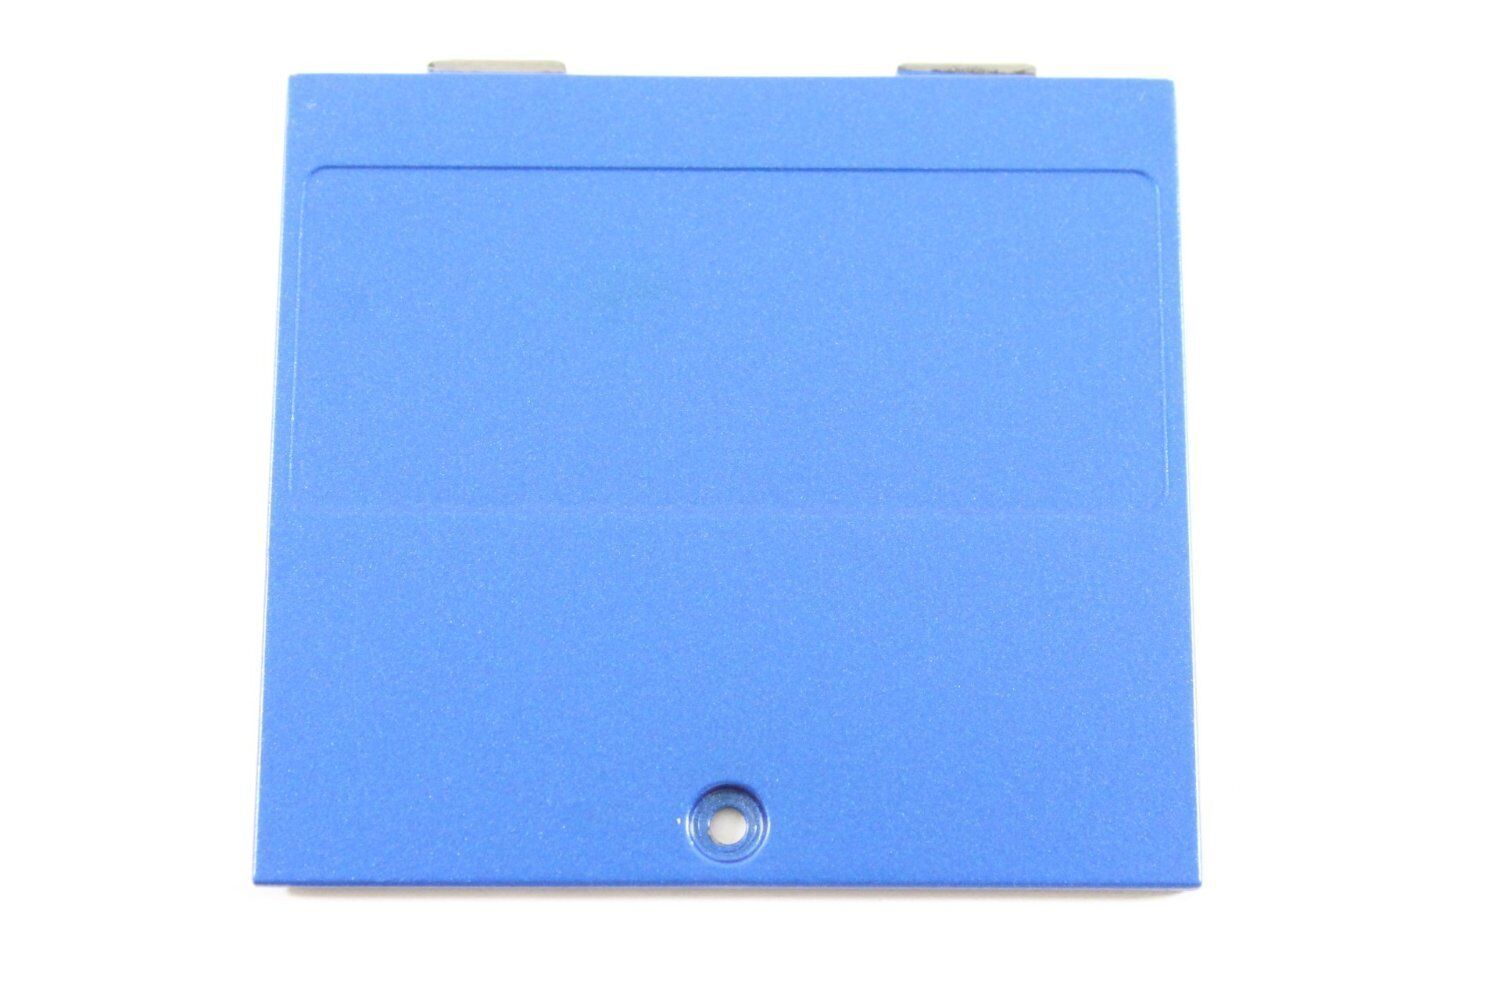 Primary image for New Genuine Dell Latitude E4300 WiFi Wireless Base Cover Door Blue - N731D